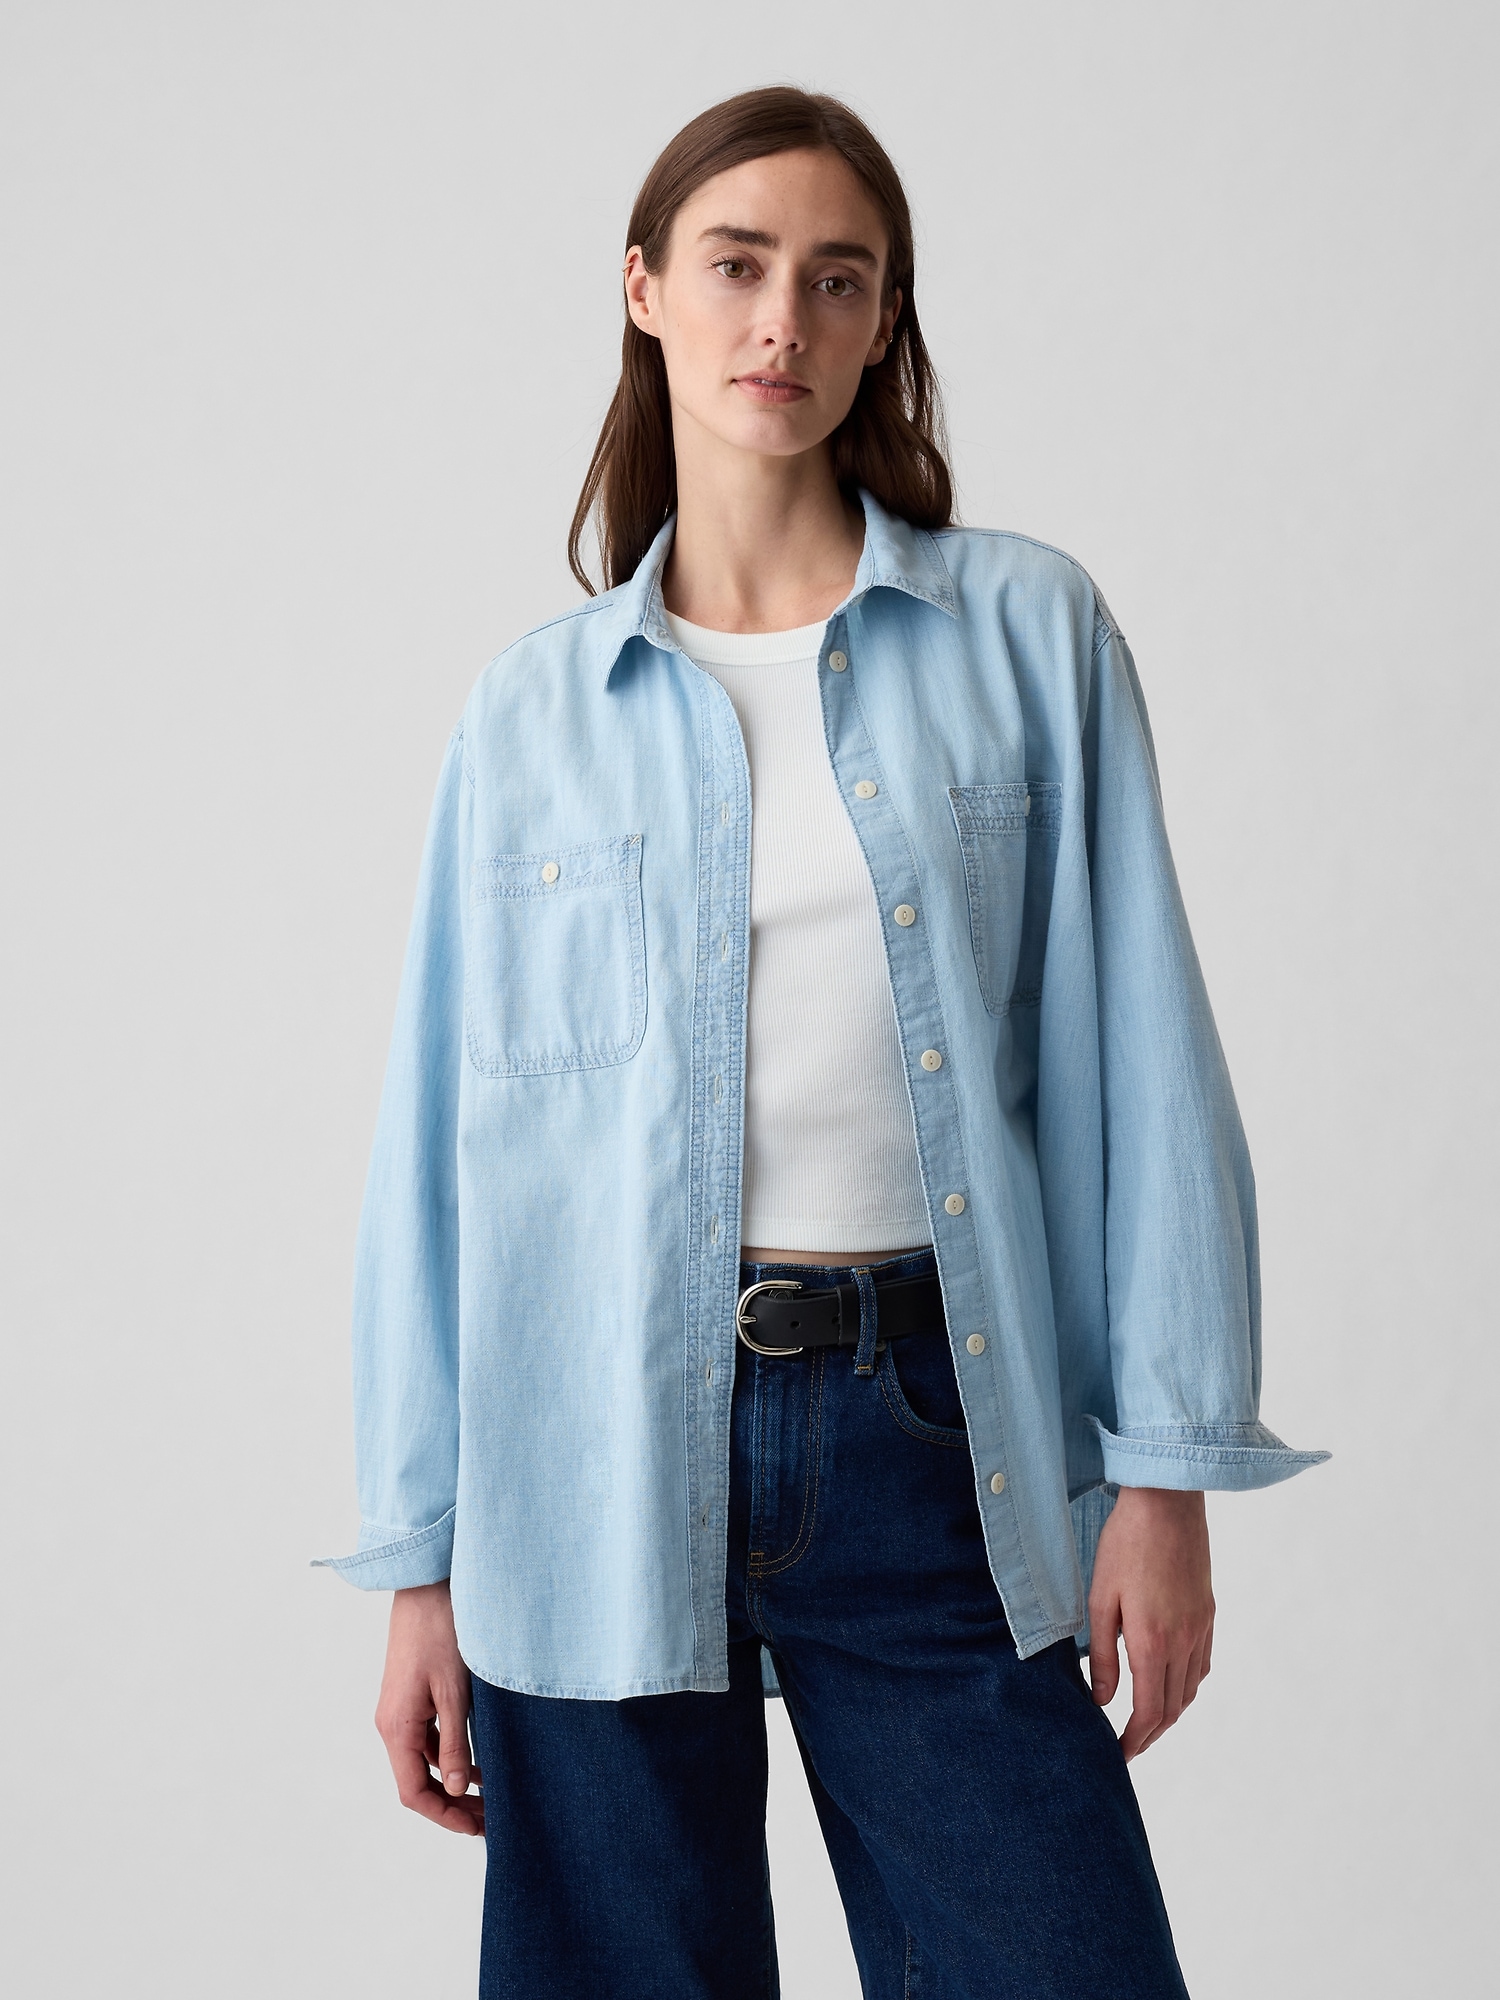 Everything You Need to Know About Denim (and Chambray) Shirts